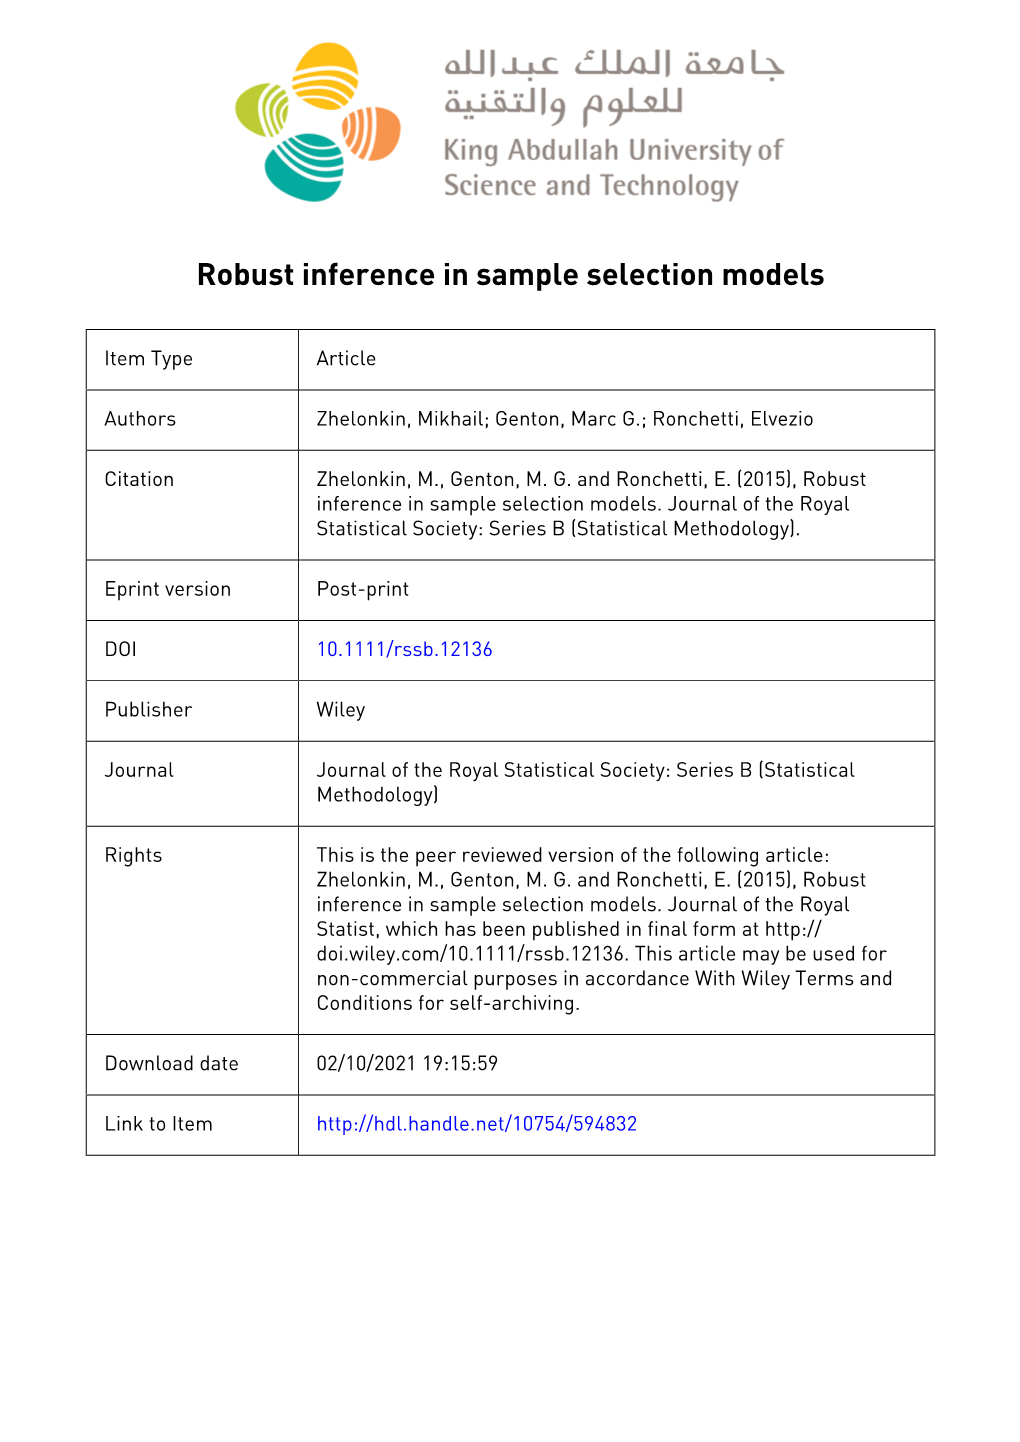 Robust Inference in Sample Selection Models